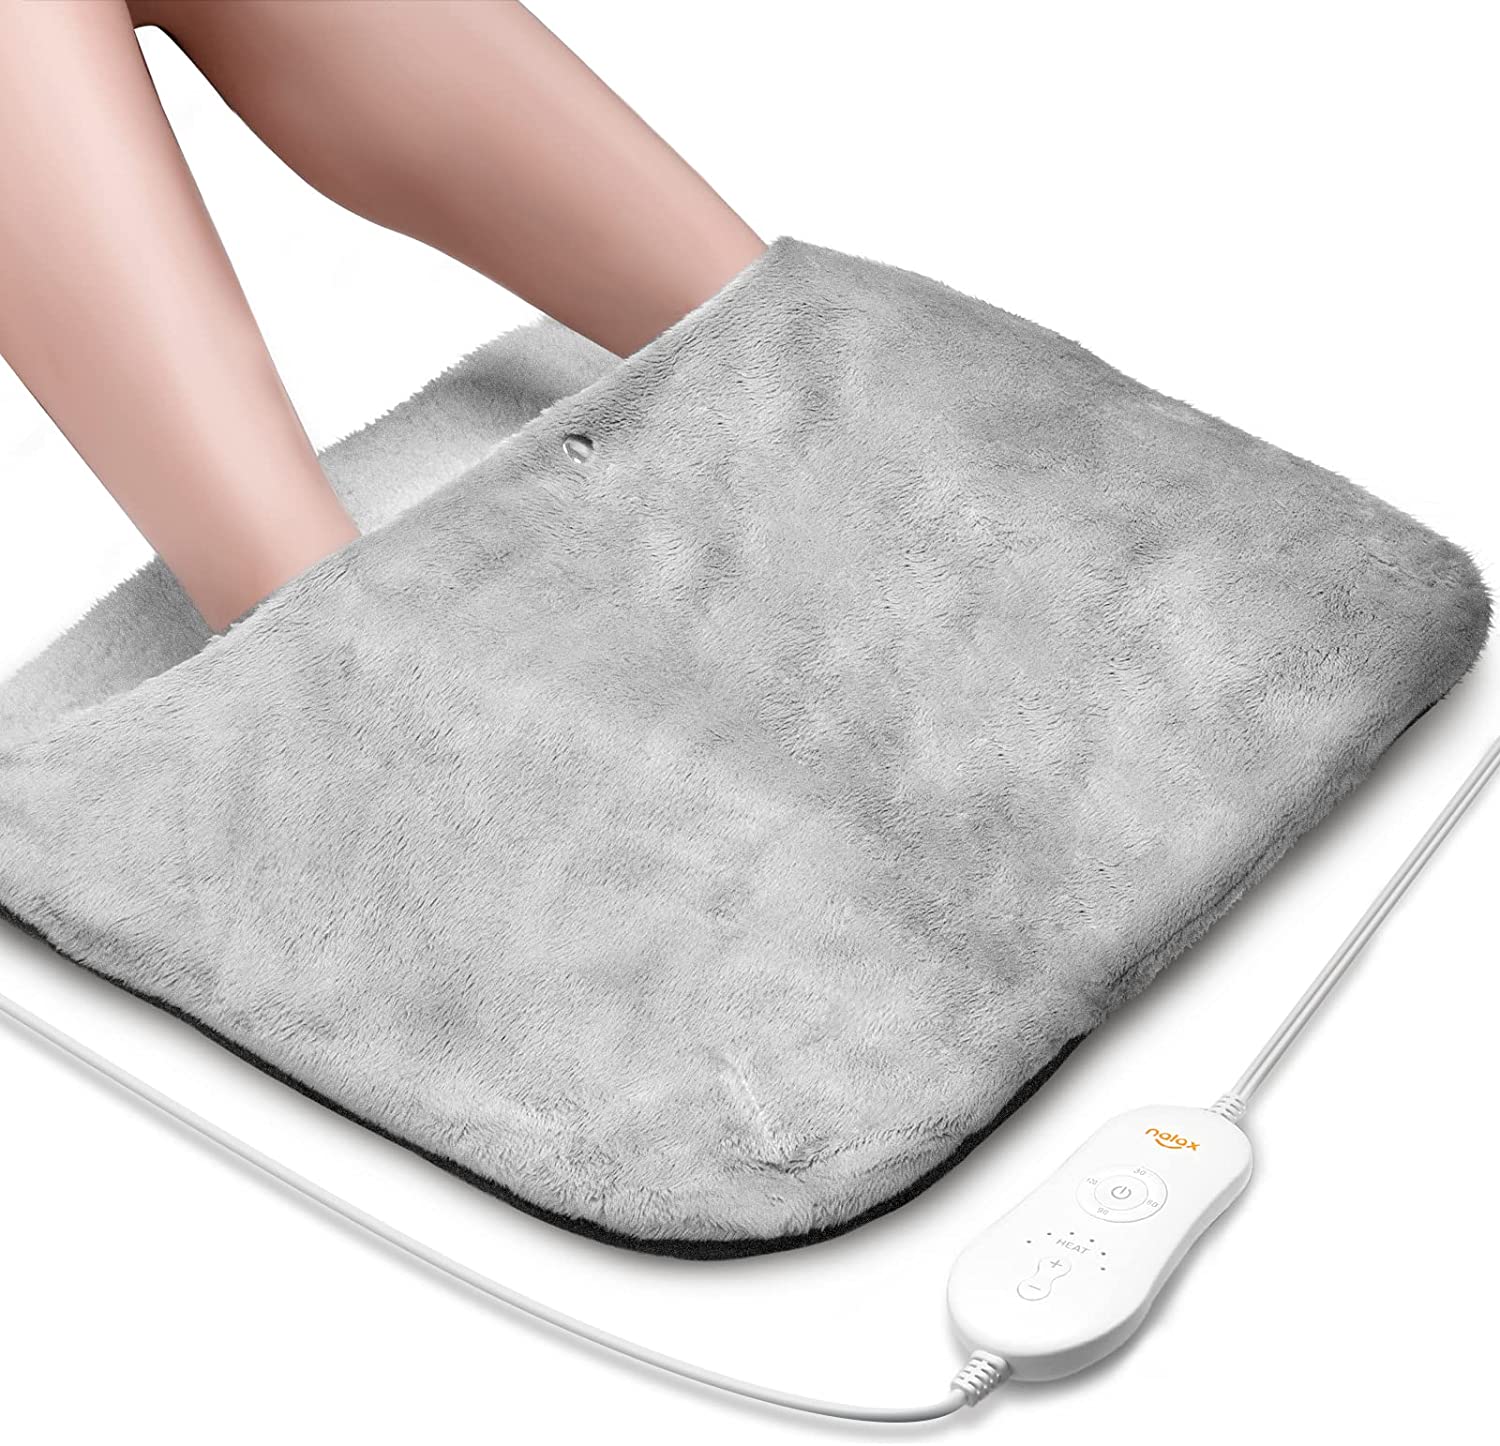 How to Buy a Best Infrared Heating Pads in an Attractive Manner 2